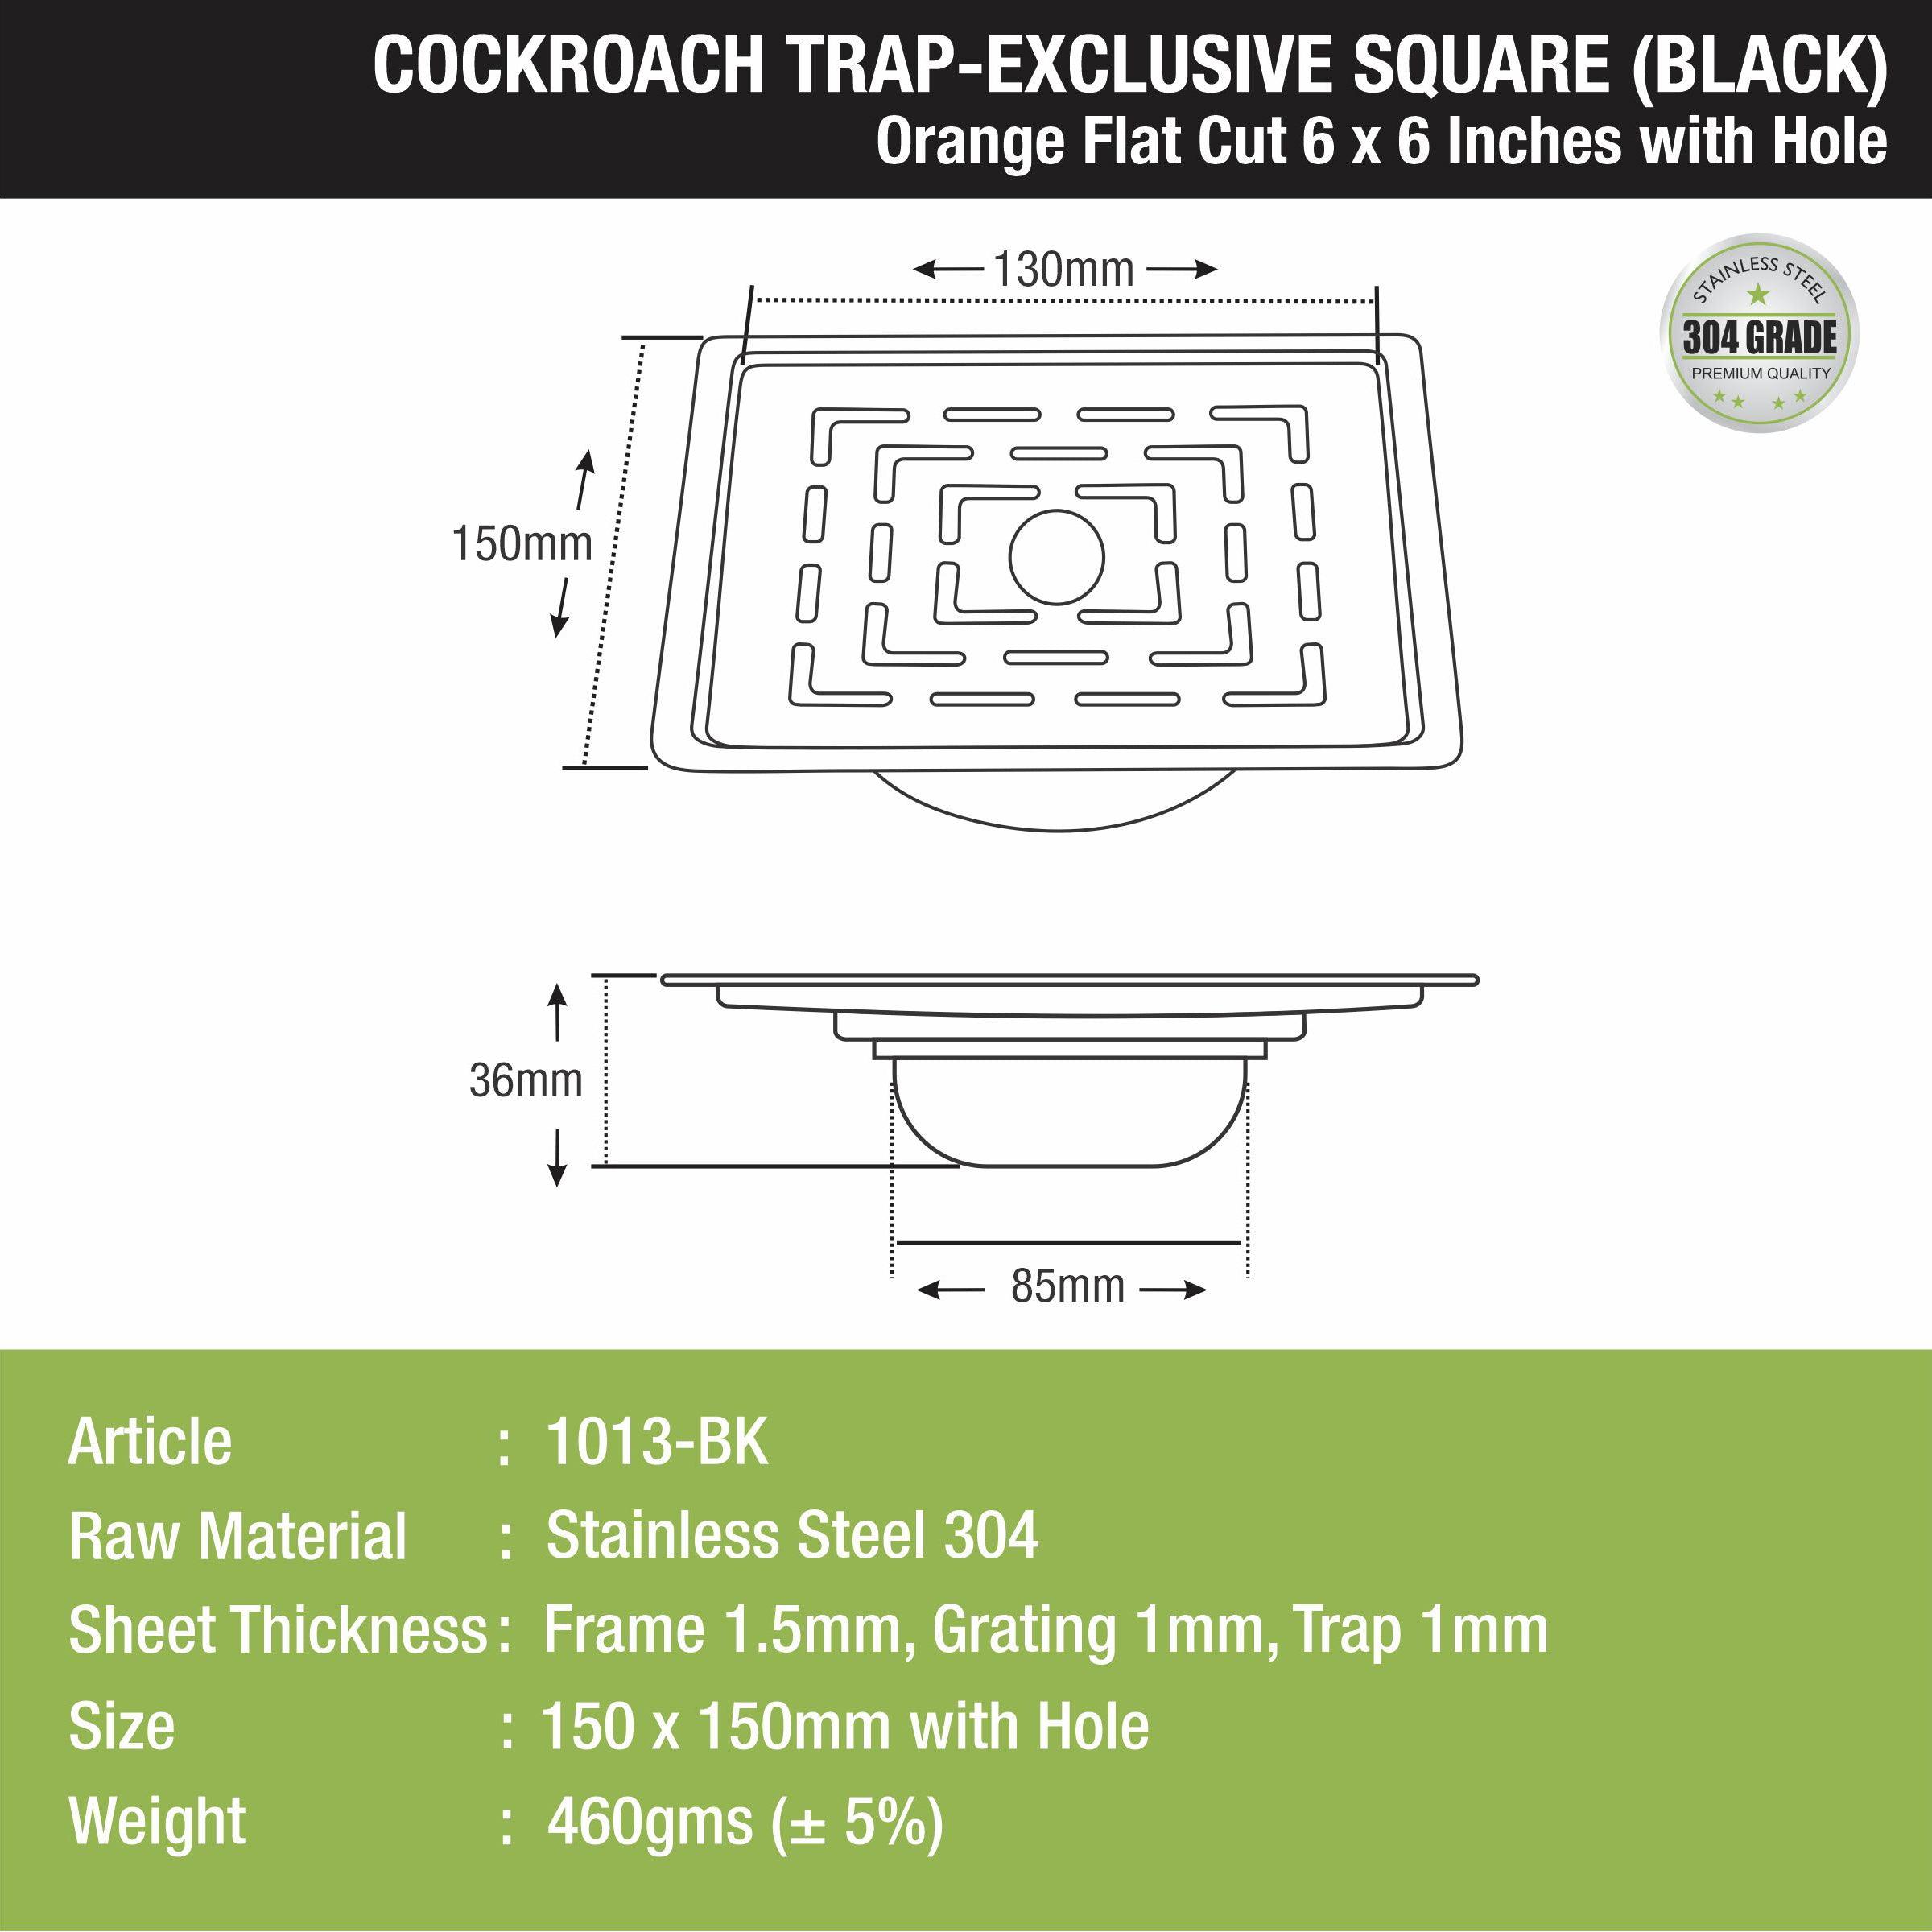 Orange Exclusive Square Flat Cut Floor Drain in Black PVD Coating (6 x 6 Inches) with Hole & Cockroach Trap  size and measurement 